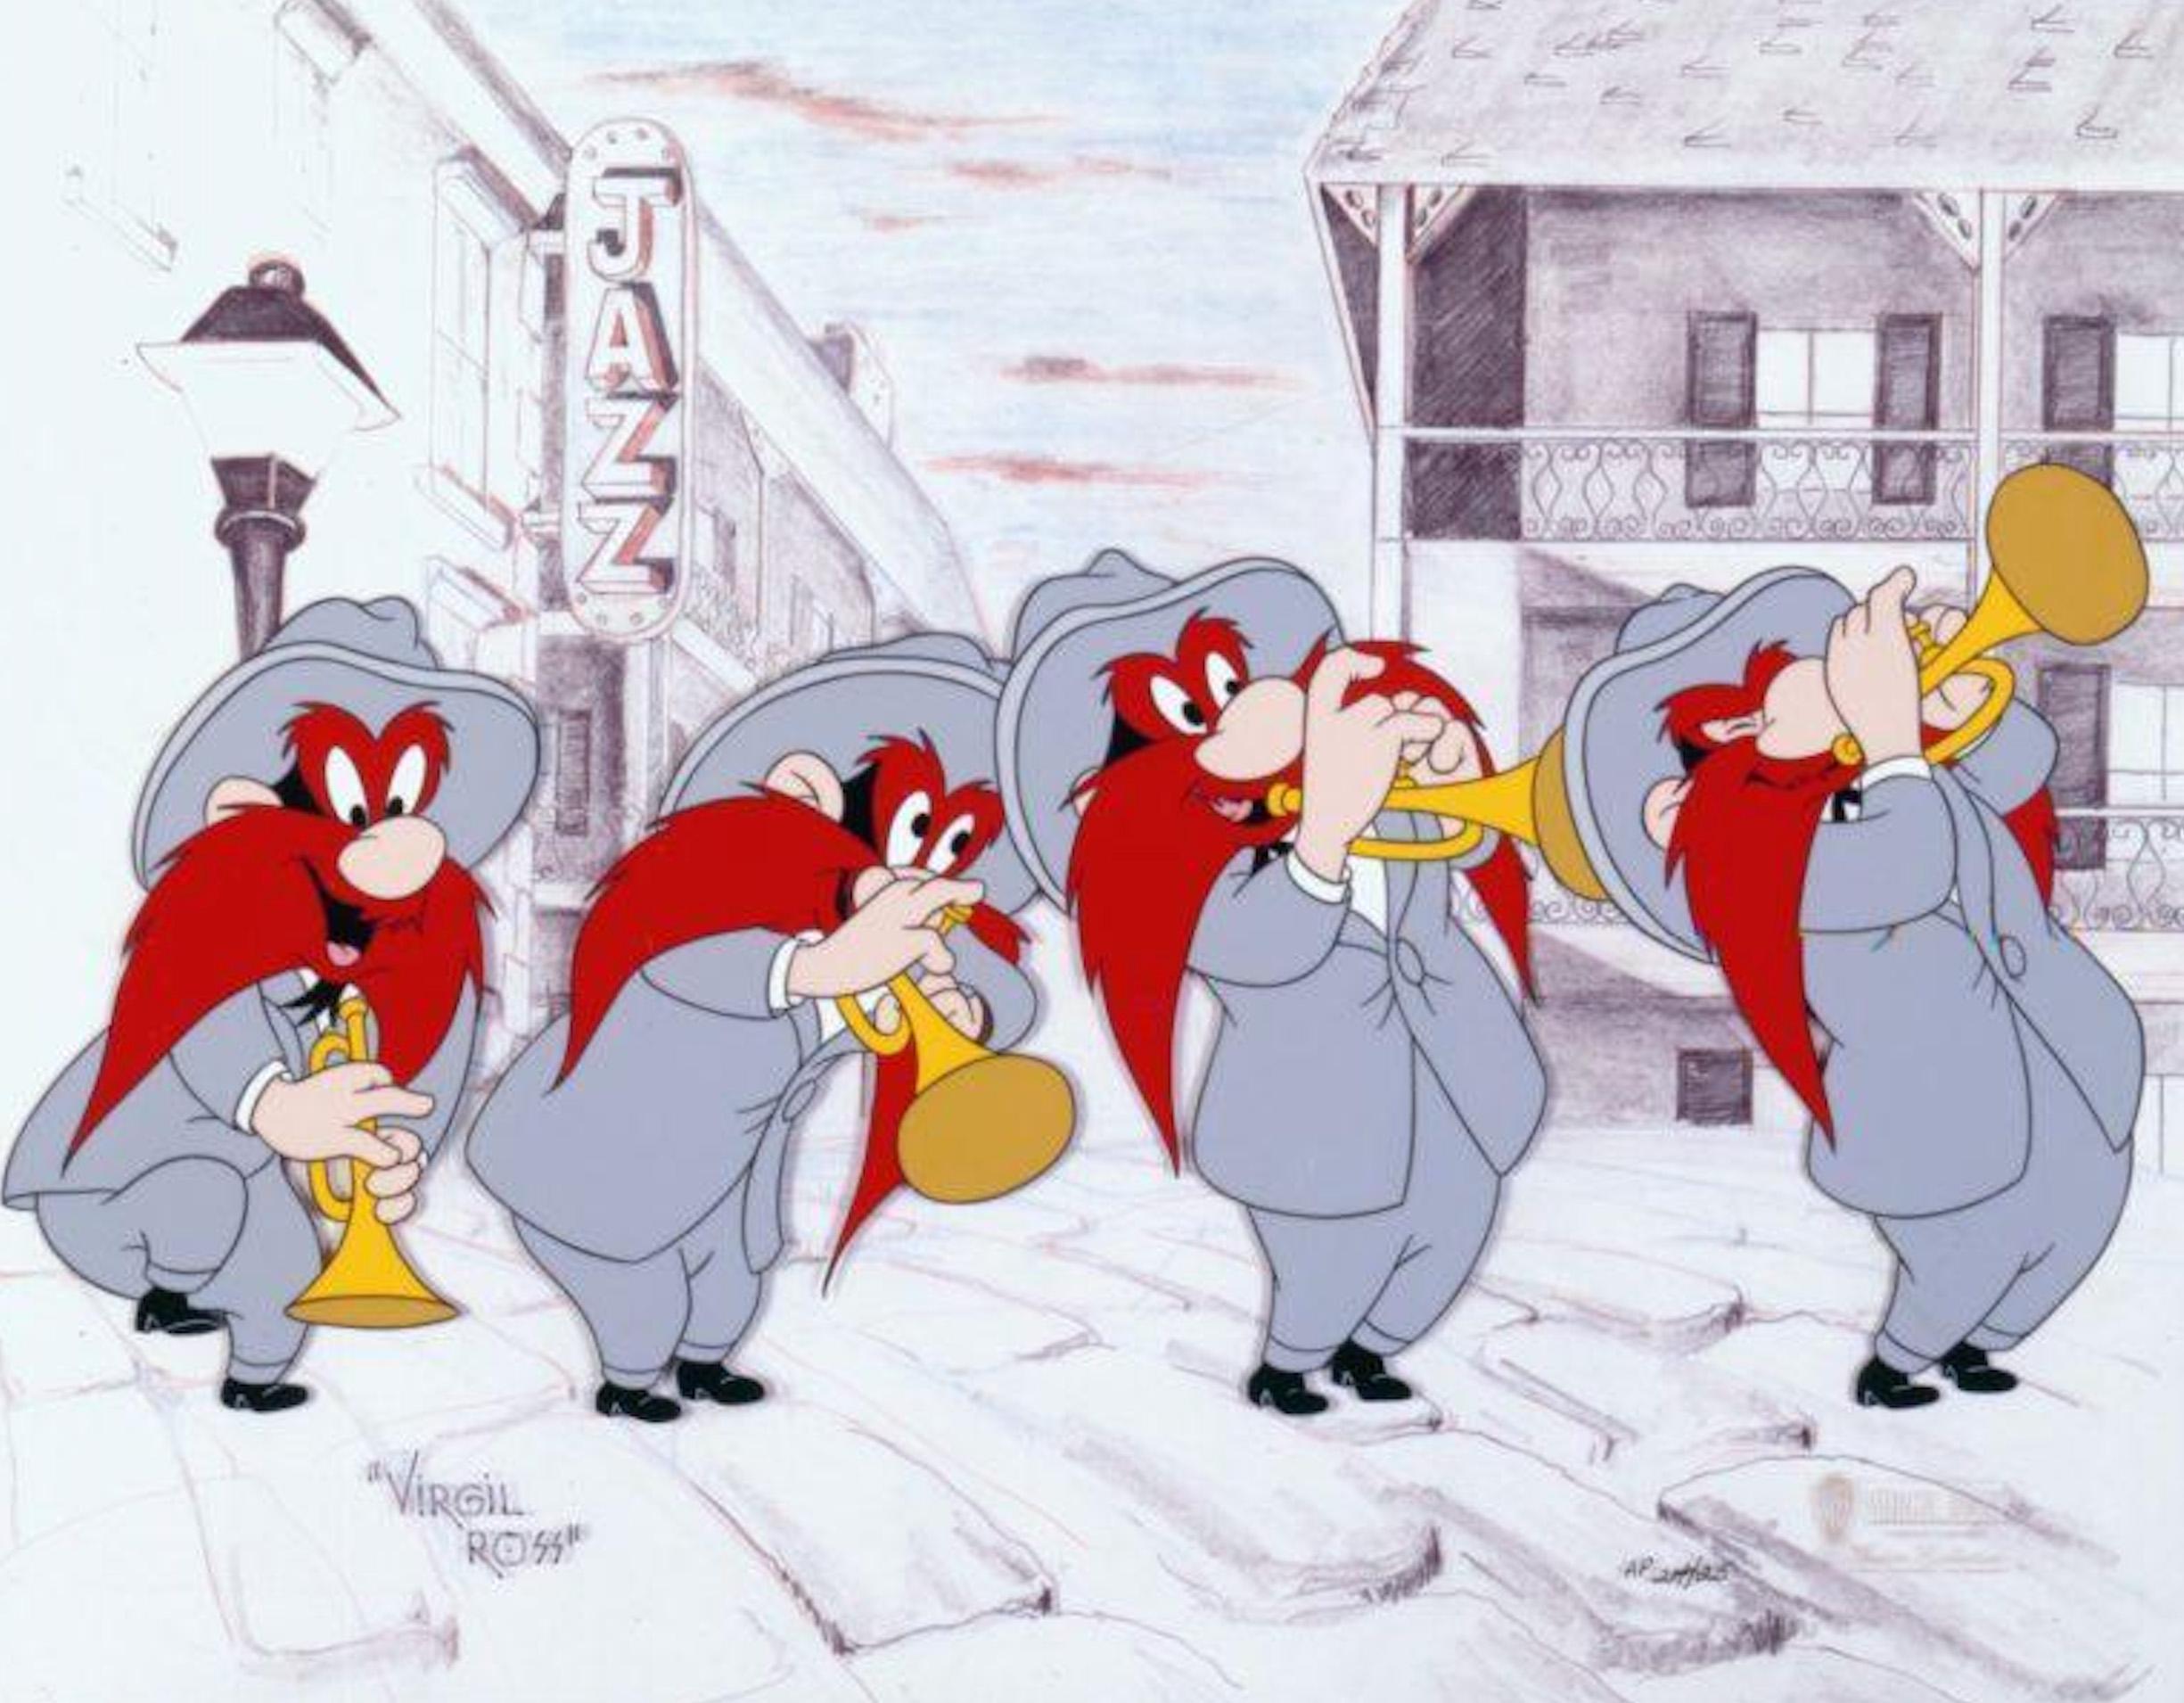 MEDIUM:  Limited Edition Cel
ARTIST: Virgil Ross
SIGNED: Virgil Ross
SKU: VR1001

ABOUT THE IMAGE: Yosemite Sam changes his normal uniform of gunslinger to that of a mighty jazz player. 

ABOUT THE MEDIUM:  This edition was created from original